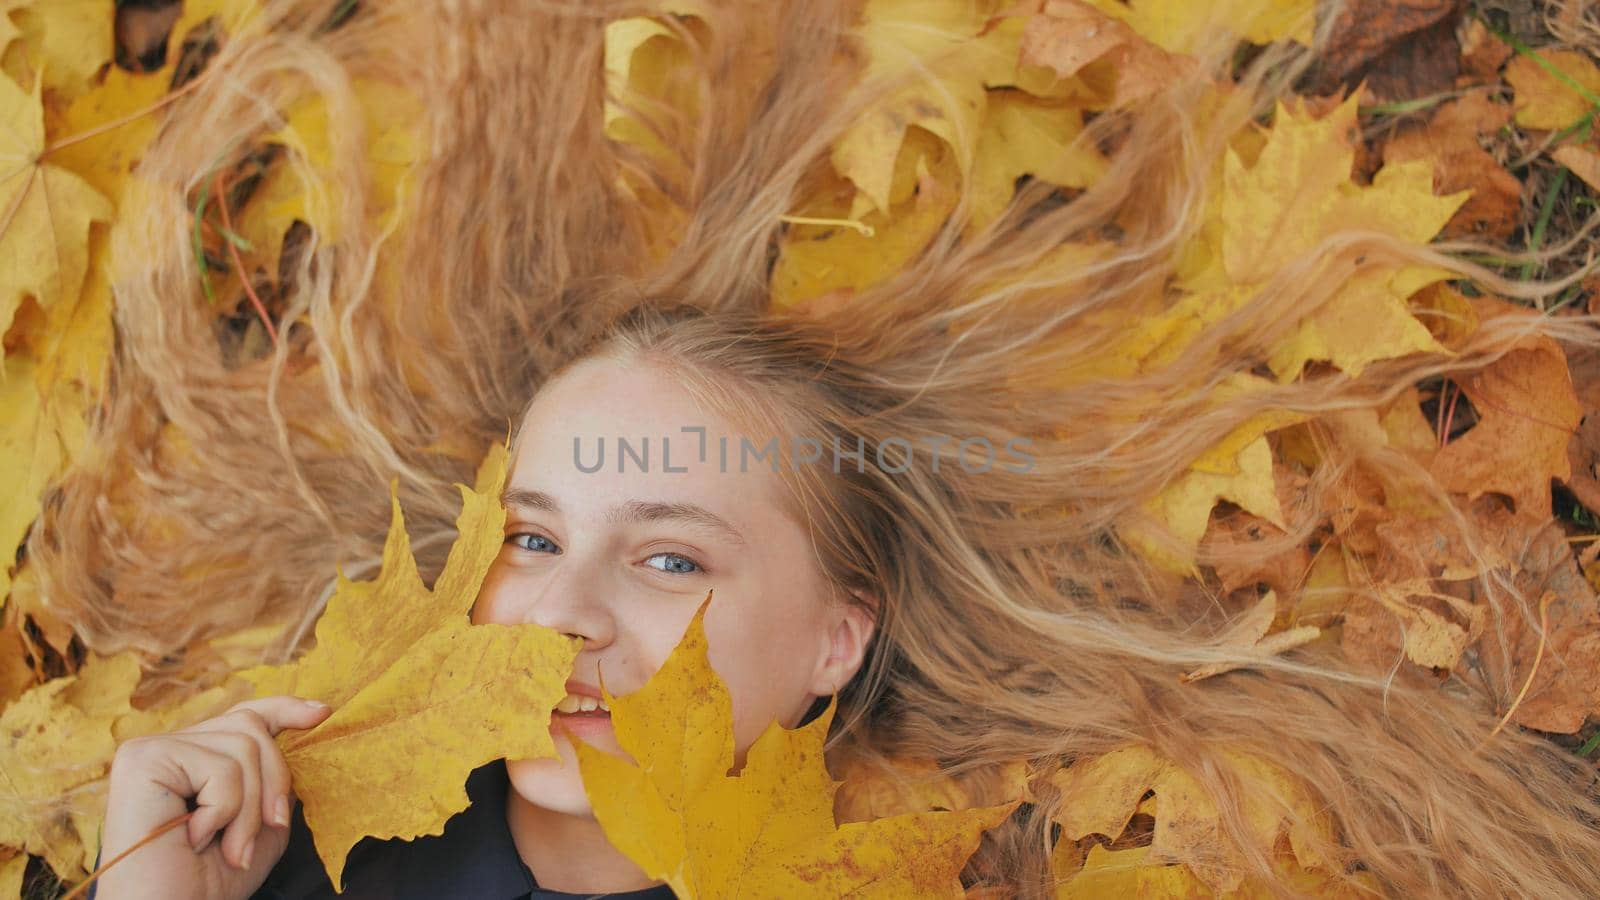 Young happy girl lies in autumn leaves and poses with maples leaves